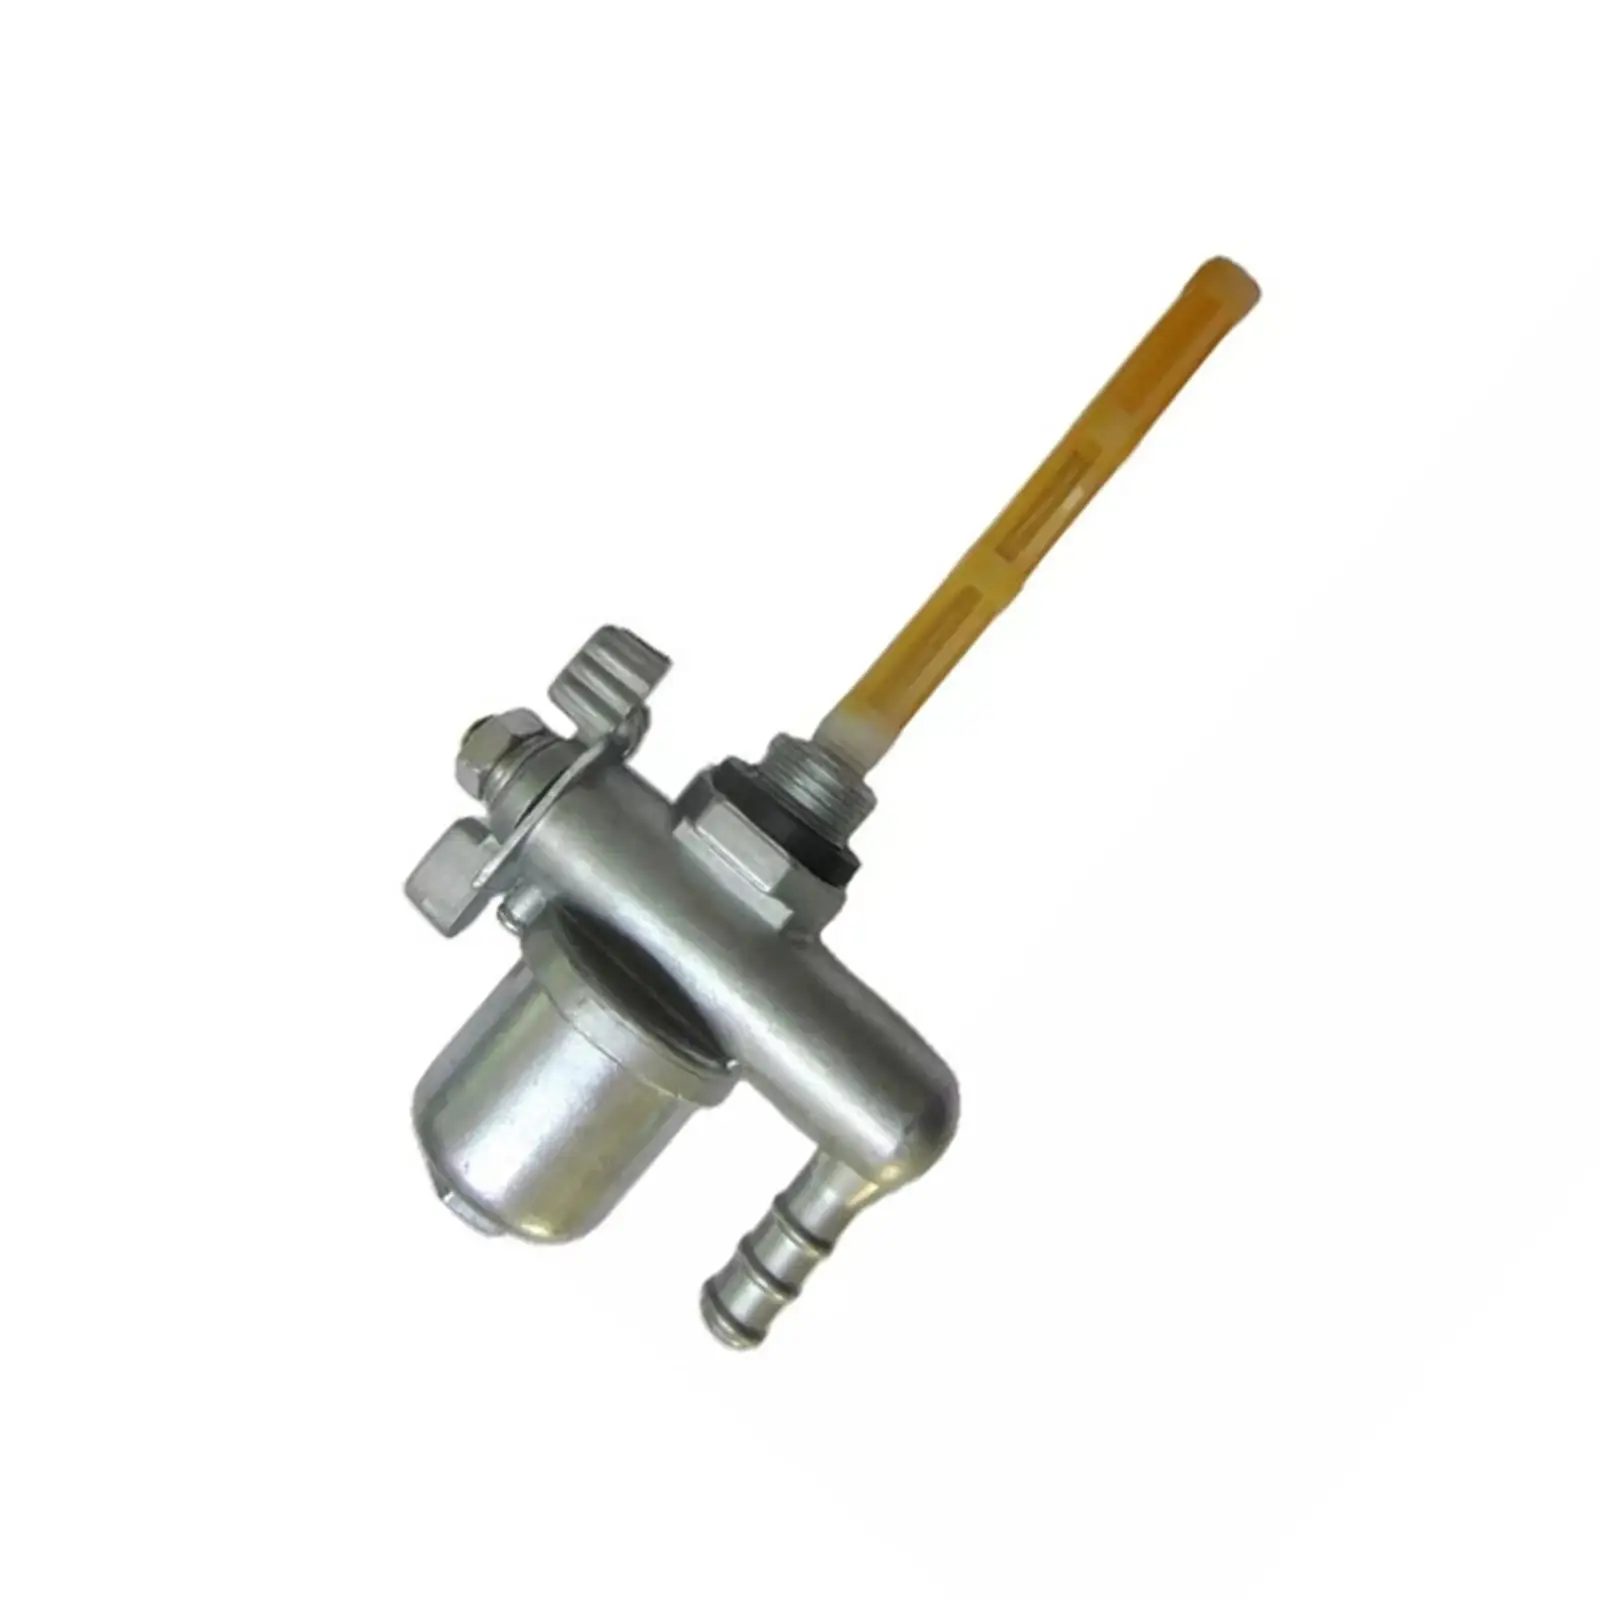 Fuel Gas Tank Switch Valve Petcock for Ruassia Msk Motorcycle Parts